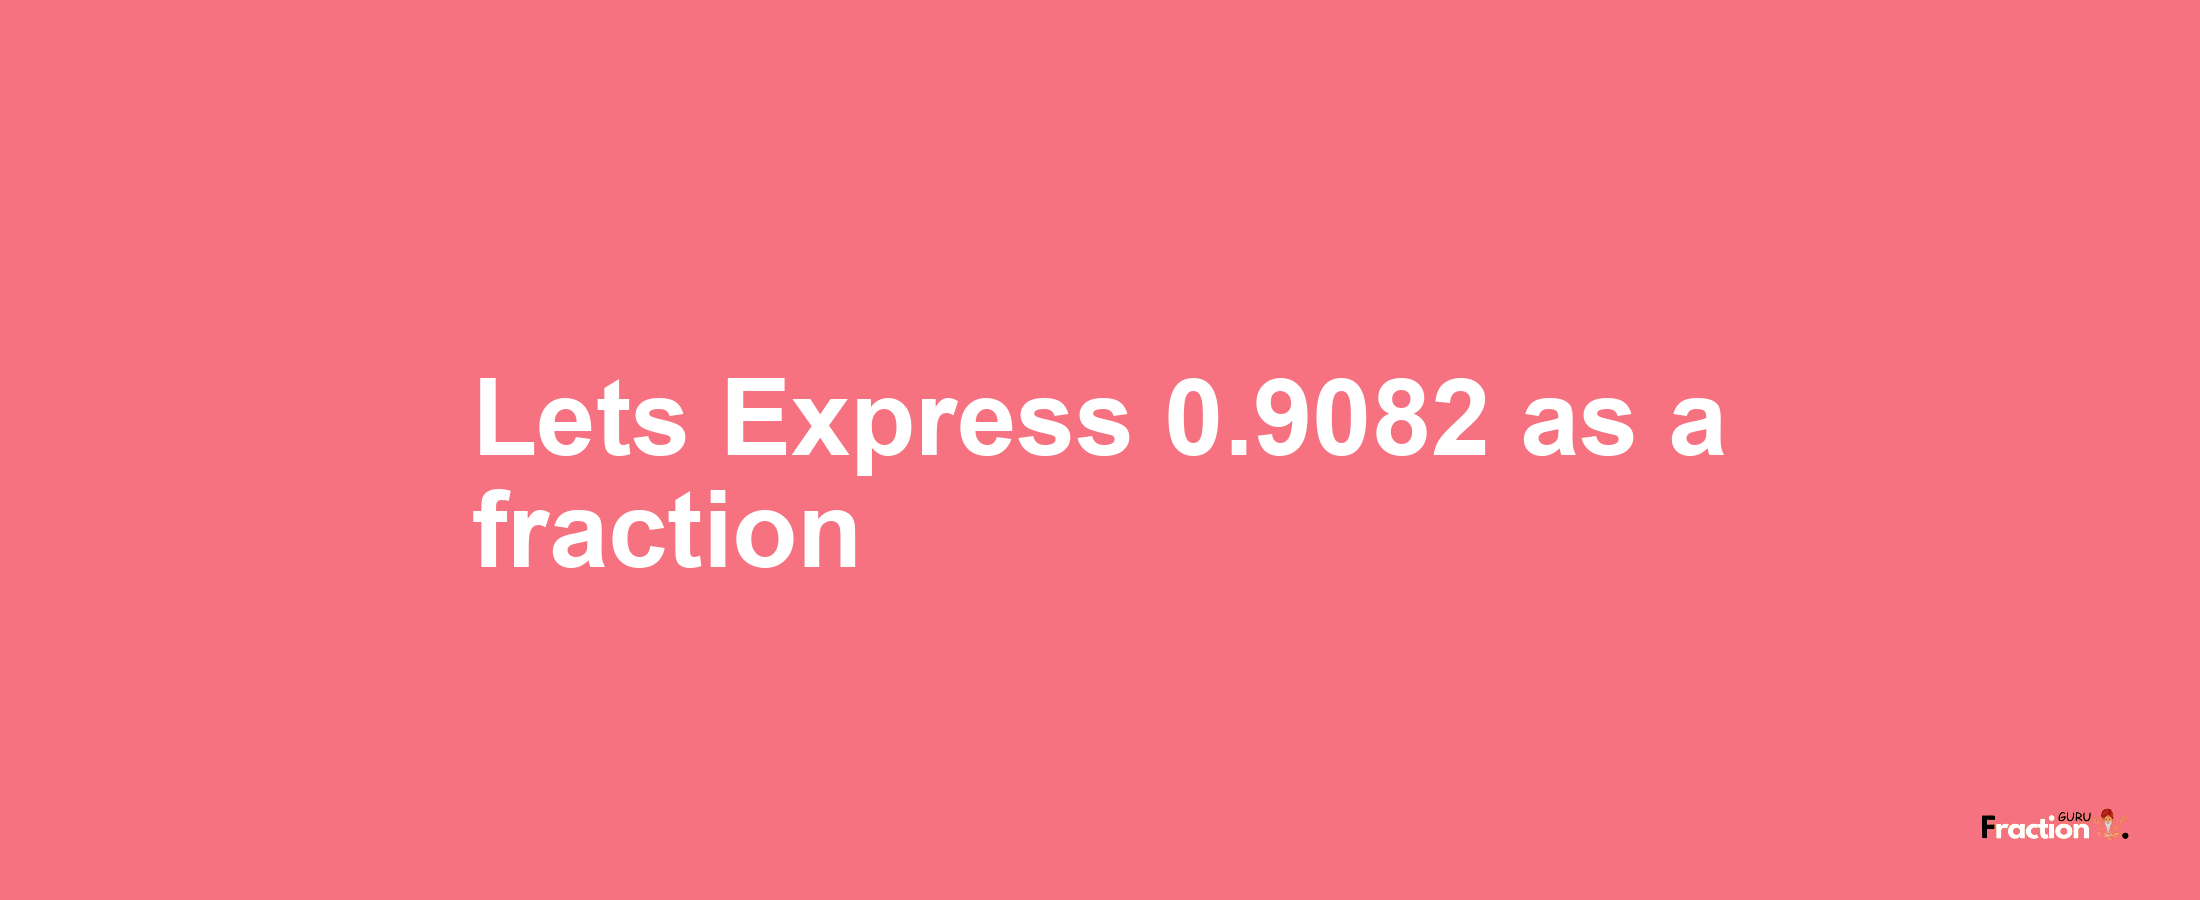 Lets Express 0.9082 as afraction